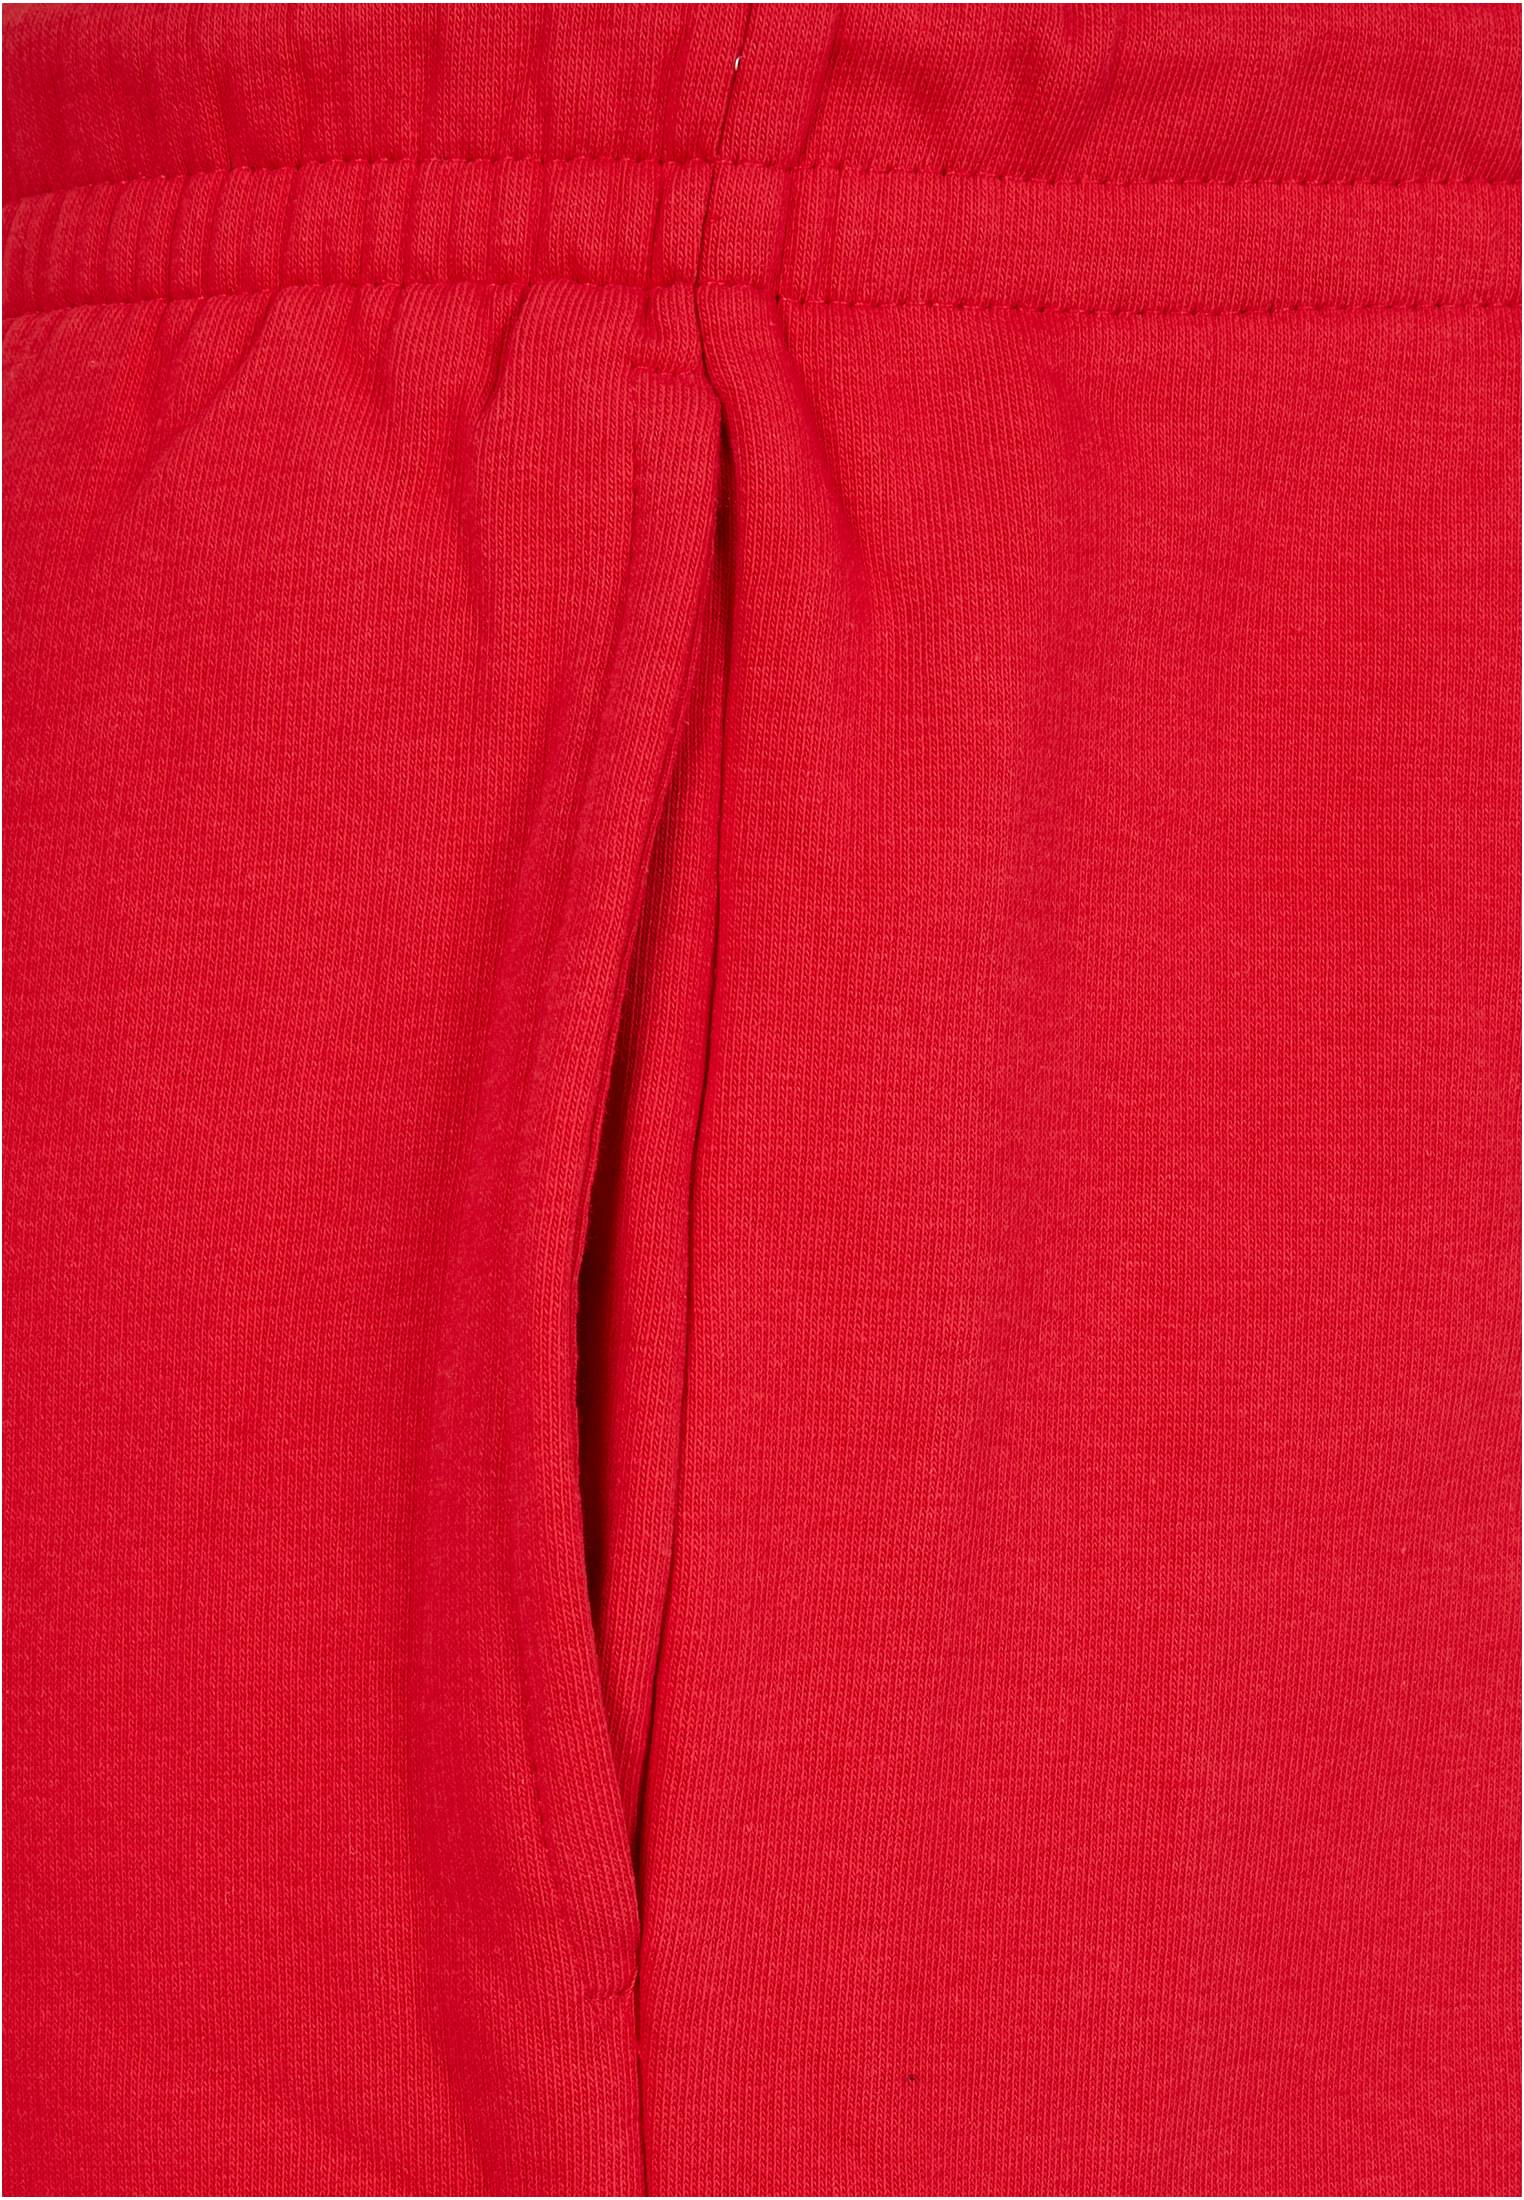 Sweatpants Basic Sweatpants 2.0 in Farbe city red